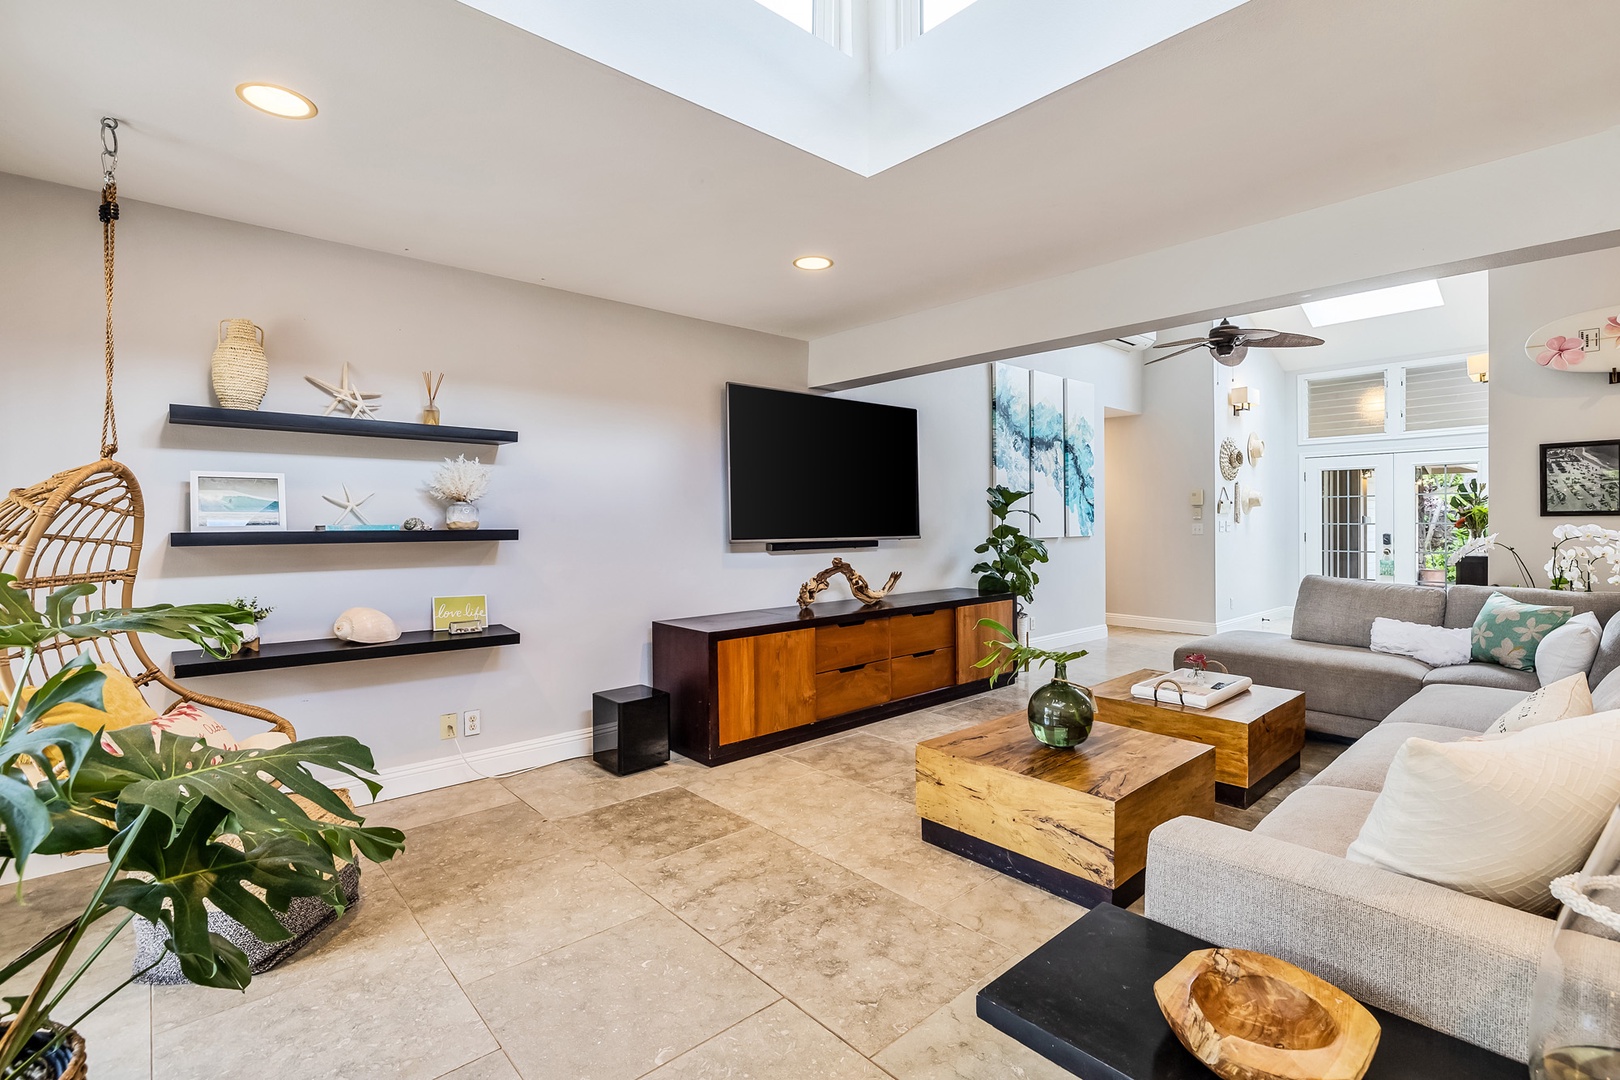 Honolulu Vacation Rentals, Hale Ho'omaha - The living area is drenched in natural light